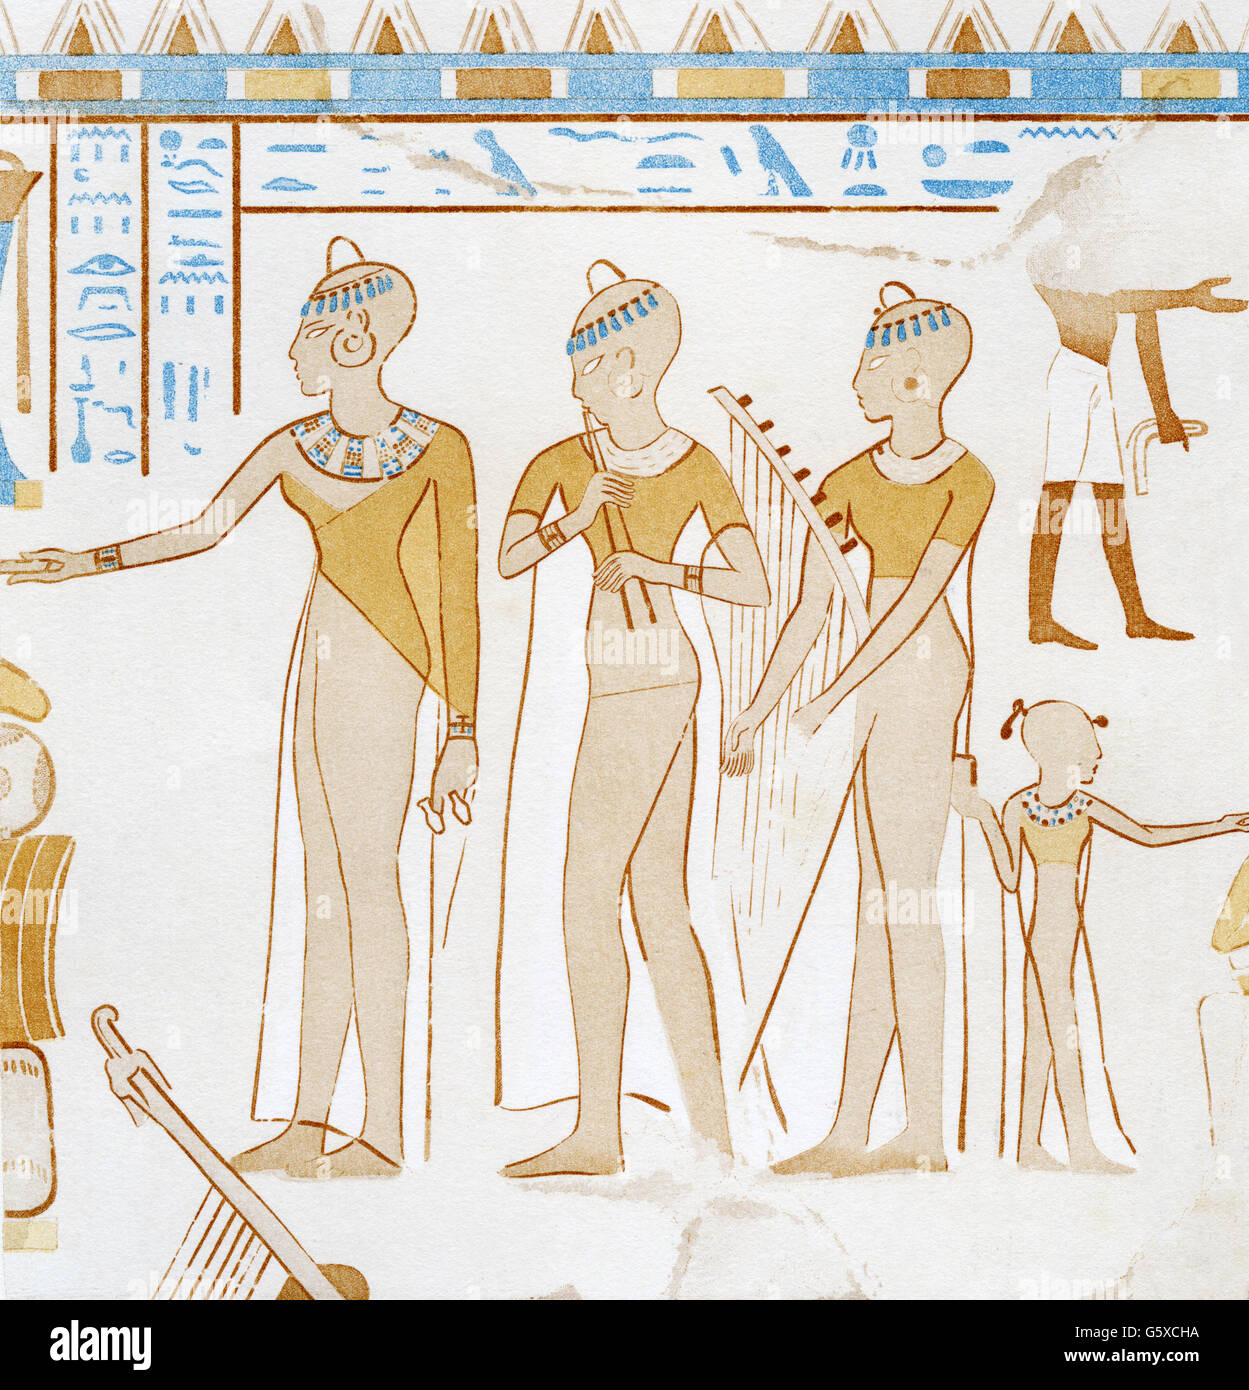 music, musician, female musicians, drawing, 19th century, after mural, Egypt, 18th Dynasty (circa 1550 - 1292 BC), people, women, musician, musicians, musical instrument, instrument, musical instruments, instruments, flute, pipe, flutes, pipes, aulos, harp, harps, prehistory, prehistoric times, 19th century, historic, historical, man, male, ancient world, men, Additional-Rights-Clearences-Not Available Stock Photo